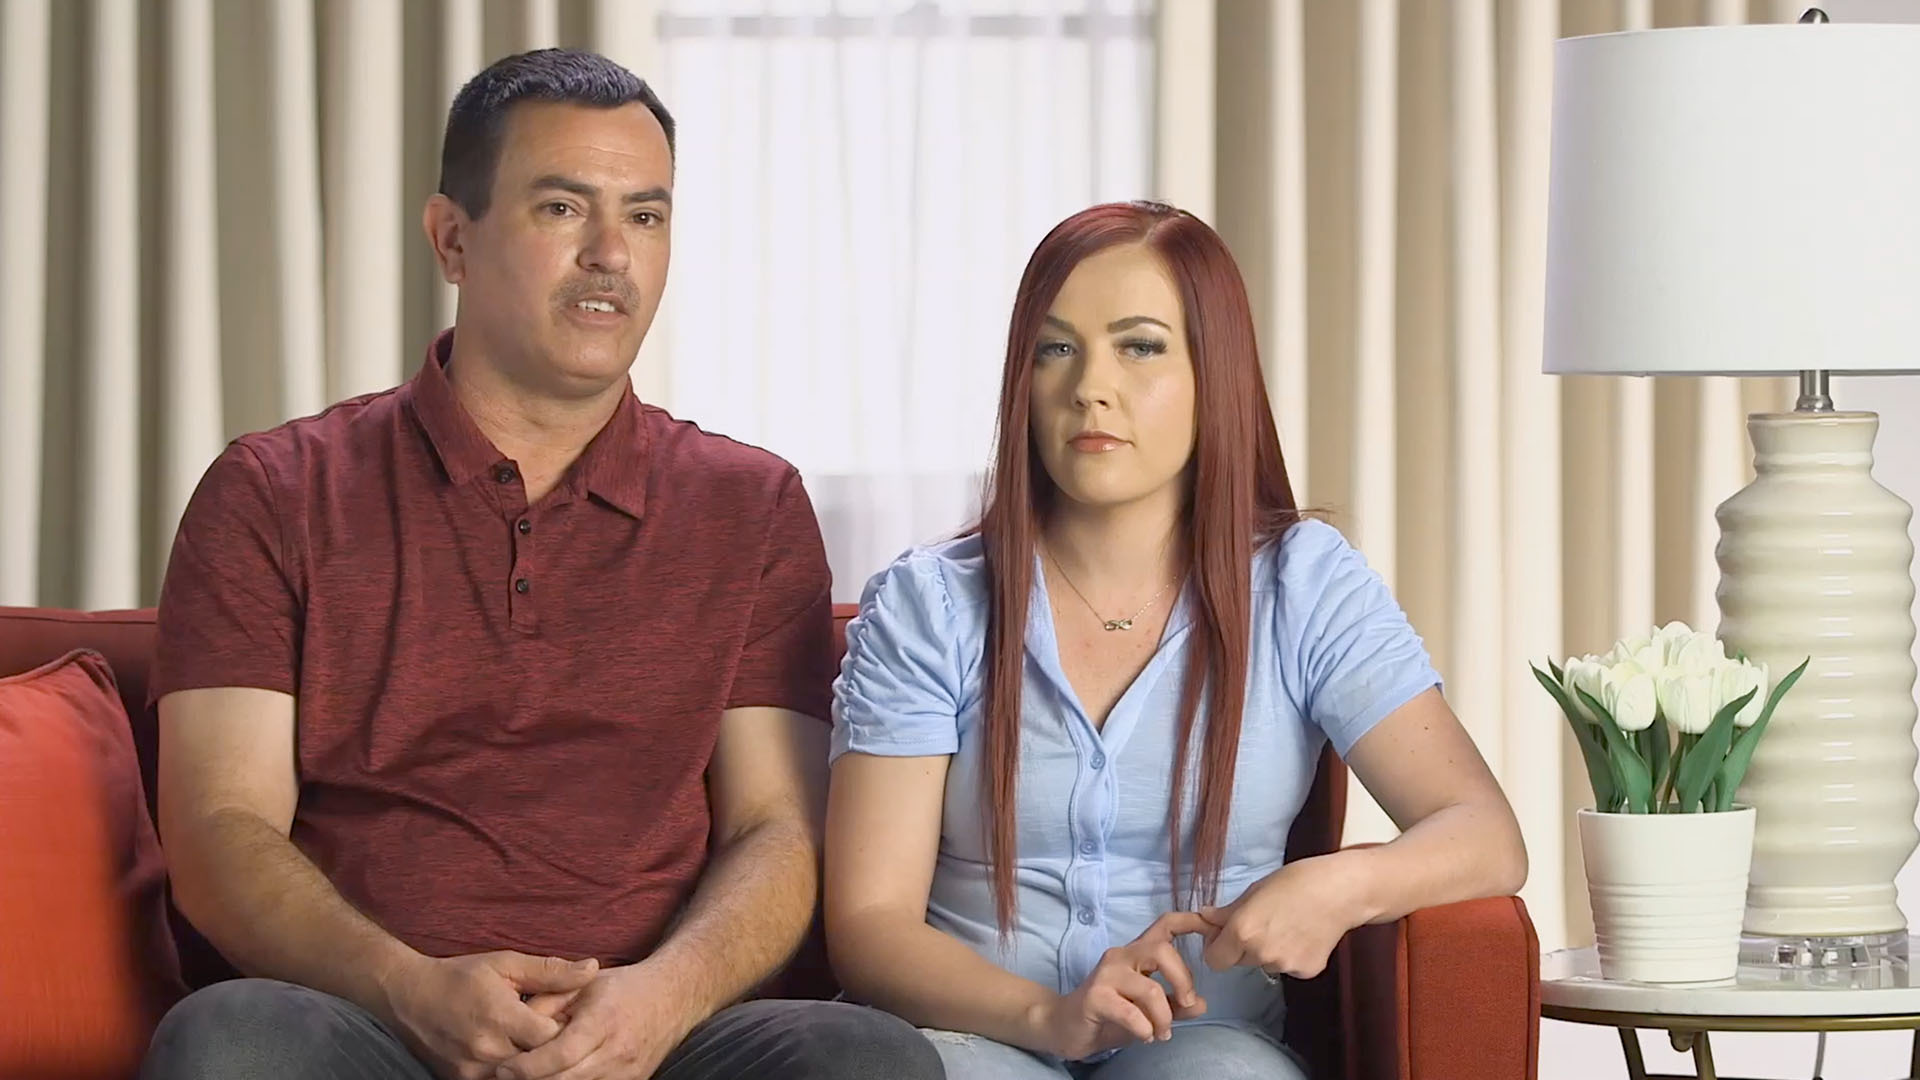 Watch Catch Up With Shawn & Sara! | Life After Lockup Video Extras